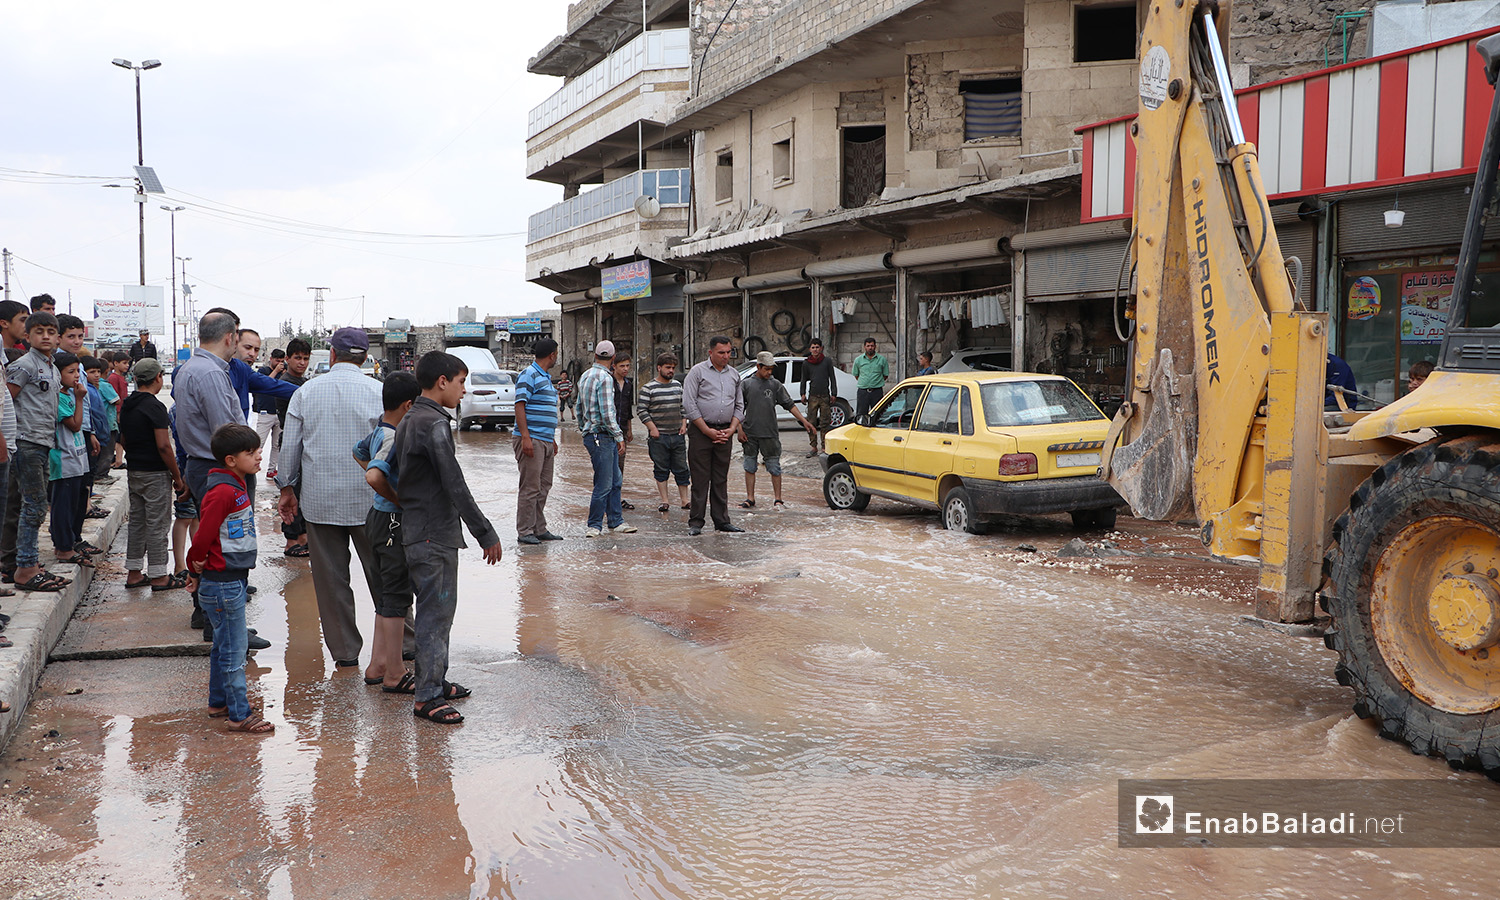 The overflowing of water due to the breakdowns of the water pipes system in al-Bab city of northern Aleppo countryside – 20 June 2020 (Enab Baladi / Asim Melhem)